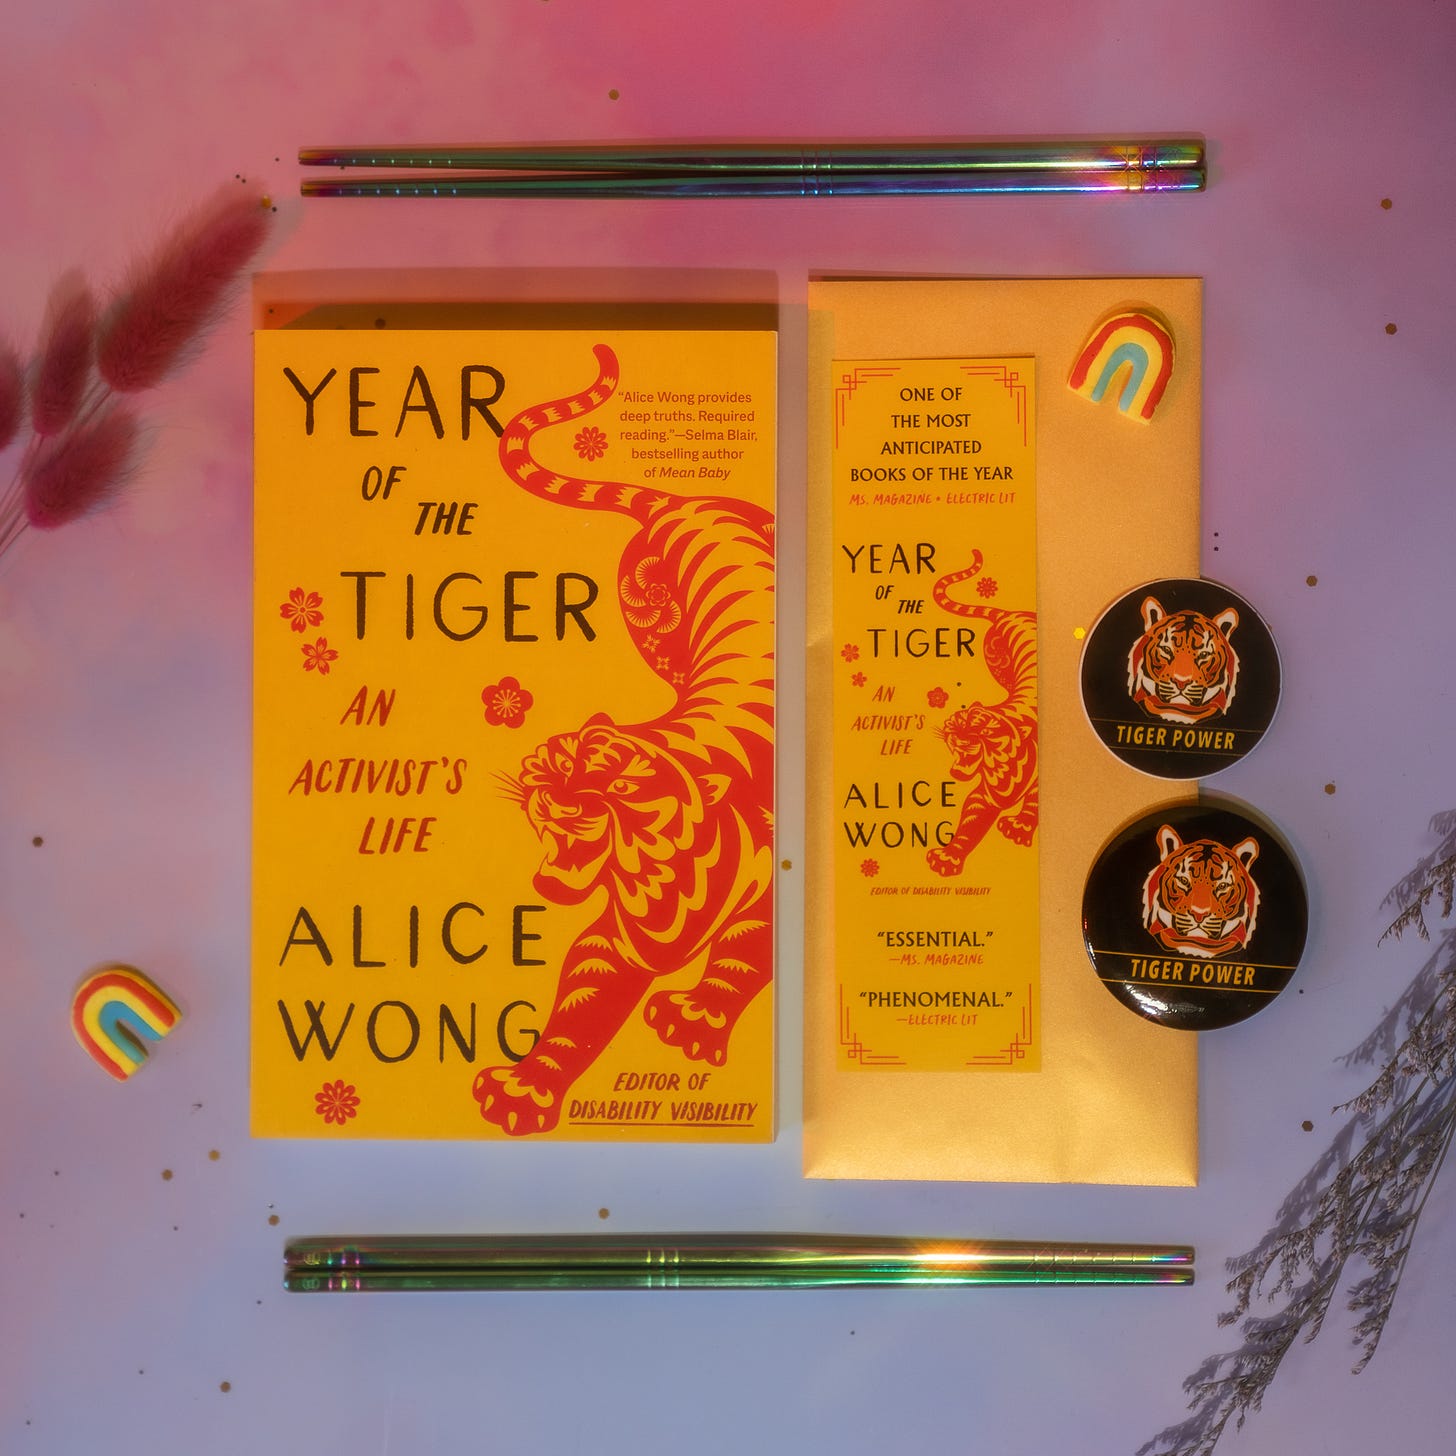 Photo with a purple-pink background with a copy of Year of the Tiger paperback in the center. Above and below the book are a pair of rainbow chopsticks from @umeshiso_ (on IG). On the right of the book is a tiger bookmark and is one round tiger sticker and one round tiger button. Floral decorations and a small rainbow decor are placed around the edges. Photo credit: @ziru.mo (on IG)